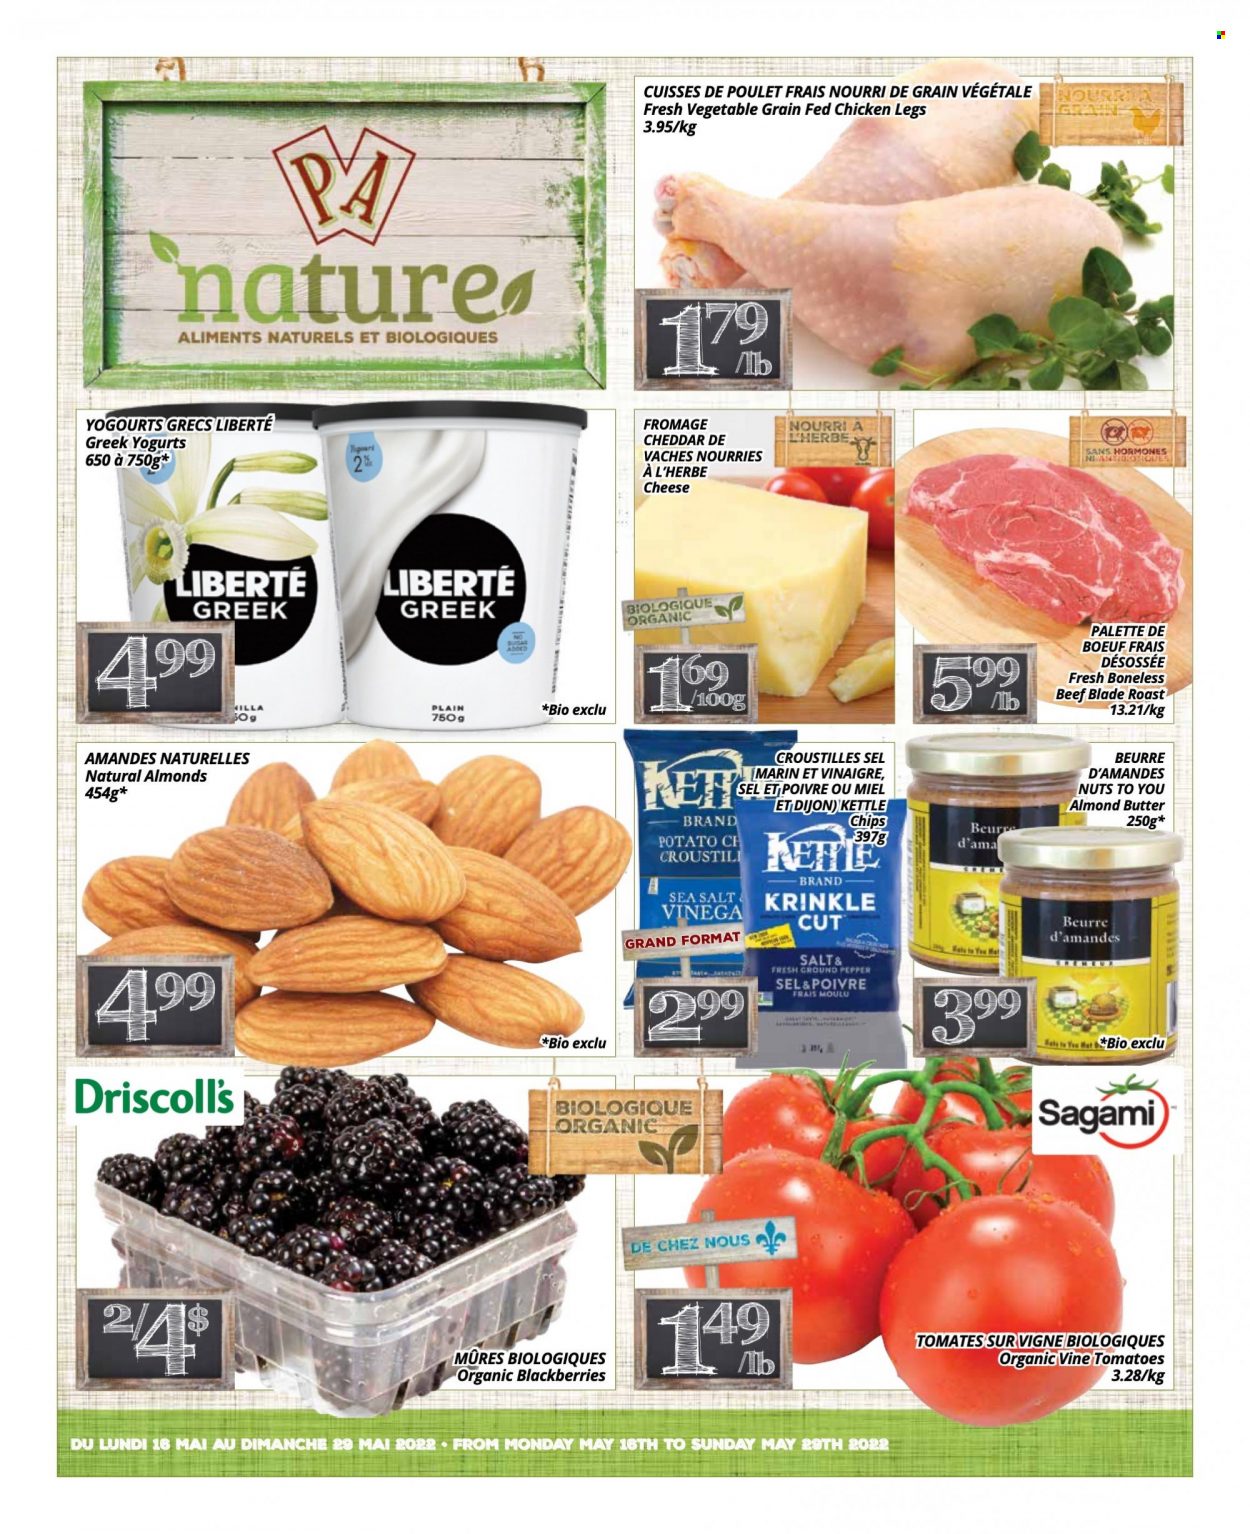 thumbnail - PA Nature Flyer - May 16, 2022 - May 29, 2022 - Sales products - blackberries, cheese, almond butter, chips, sugar, almonds, chicken legs, chicken. Page 1.